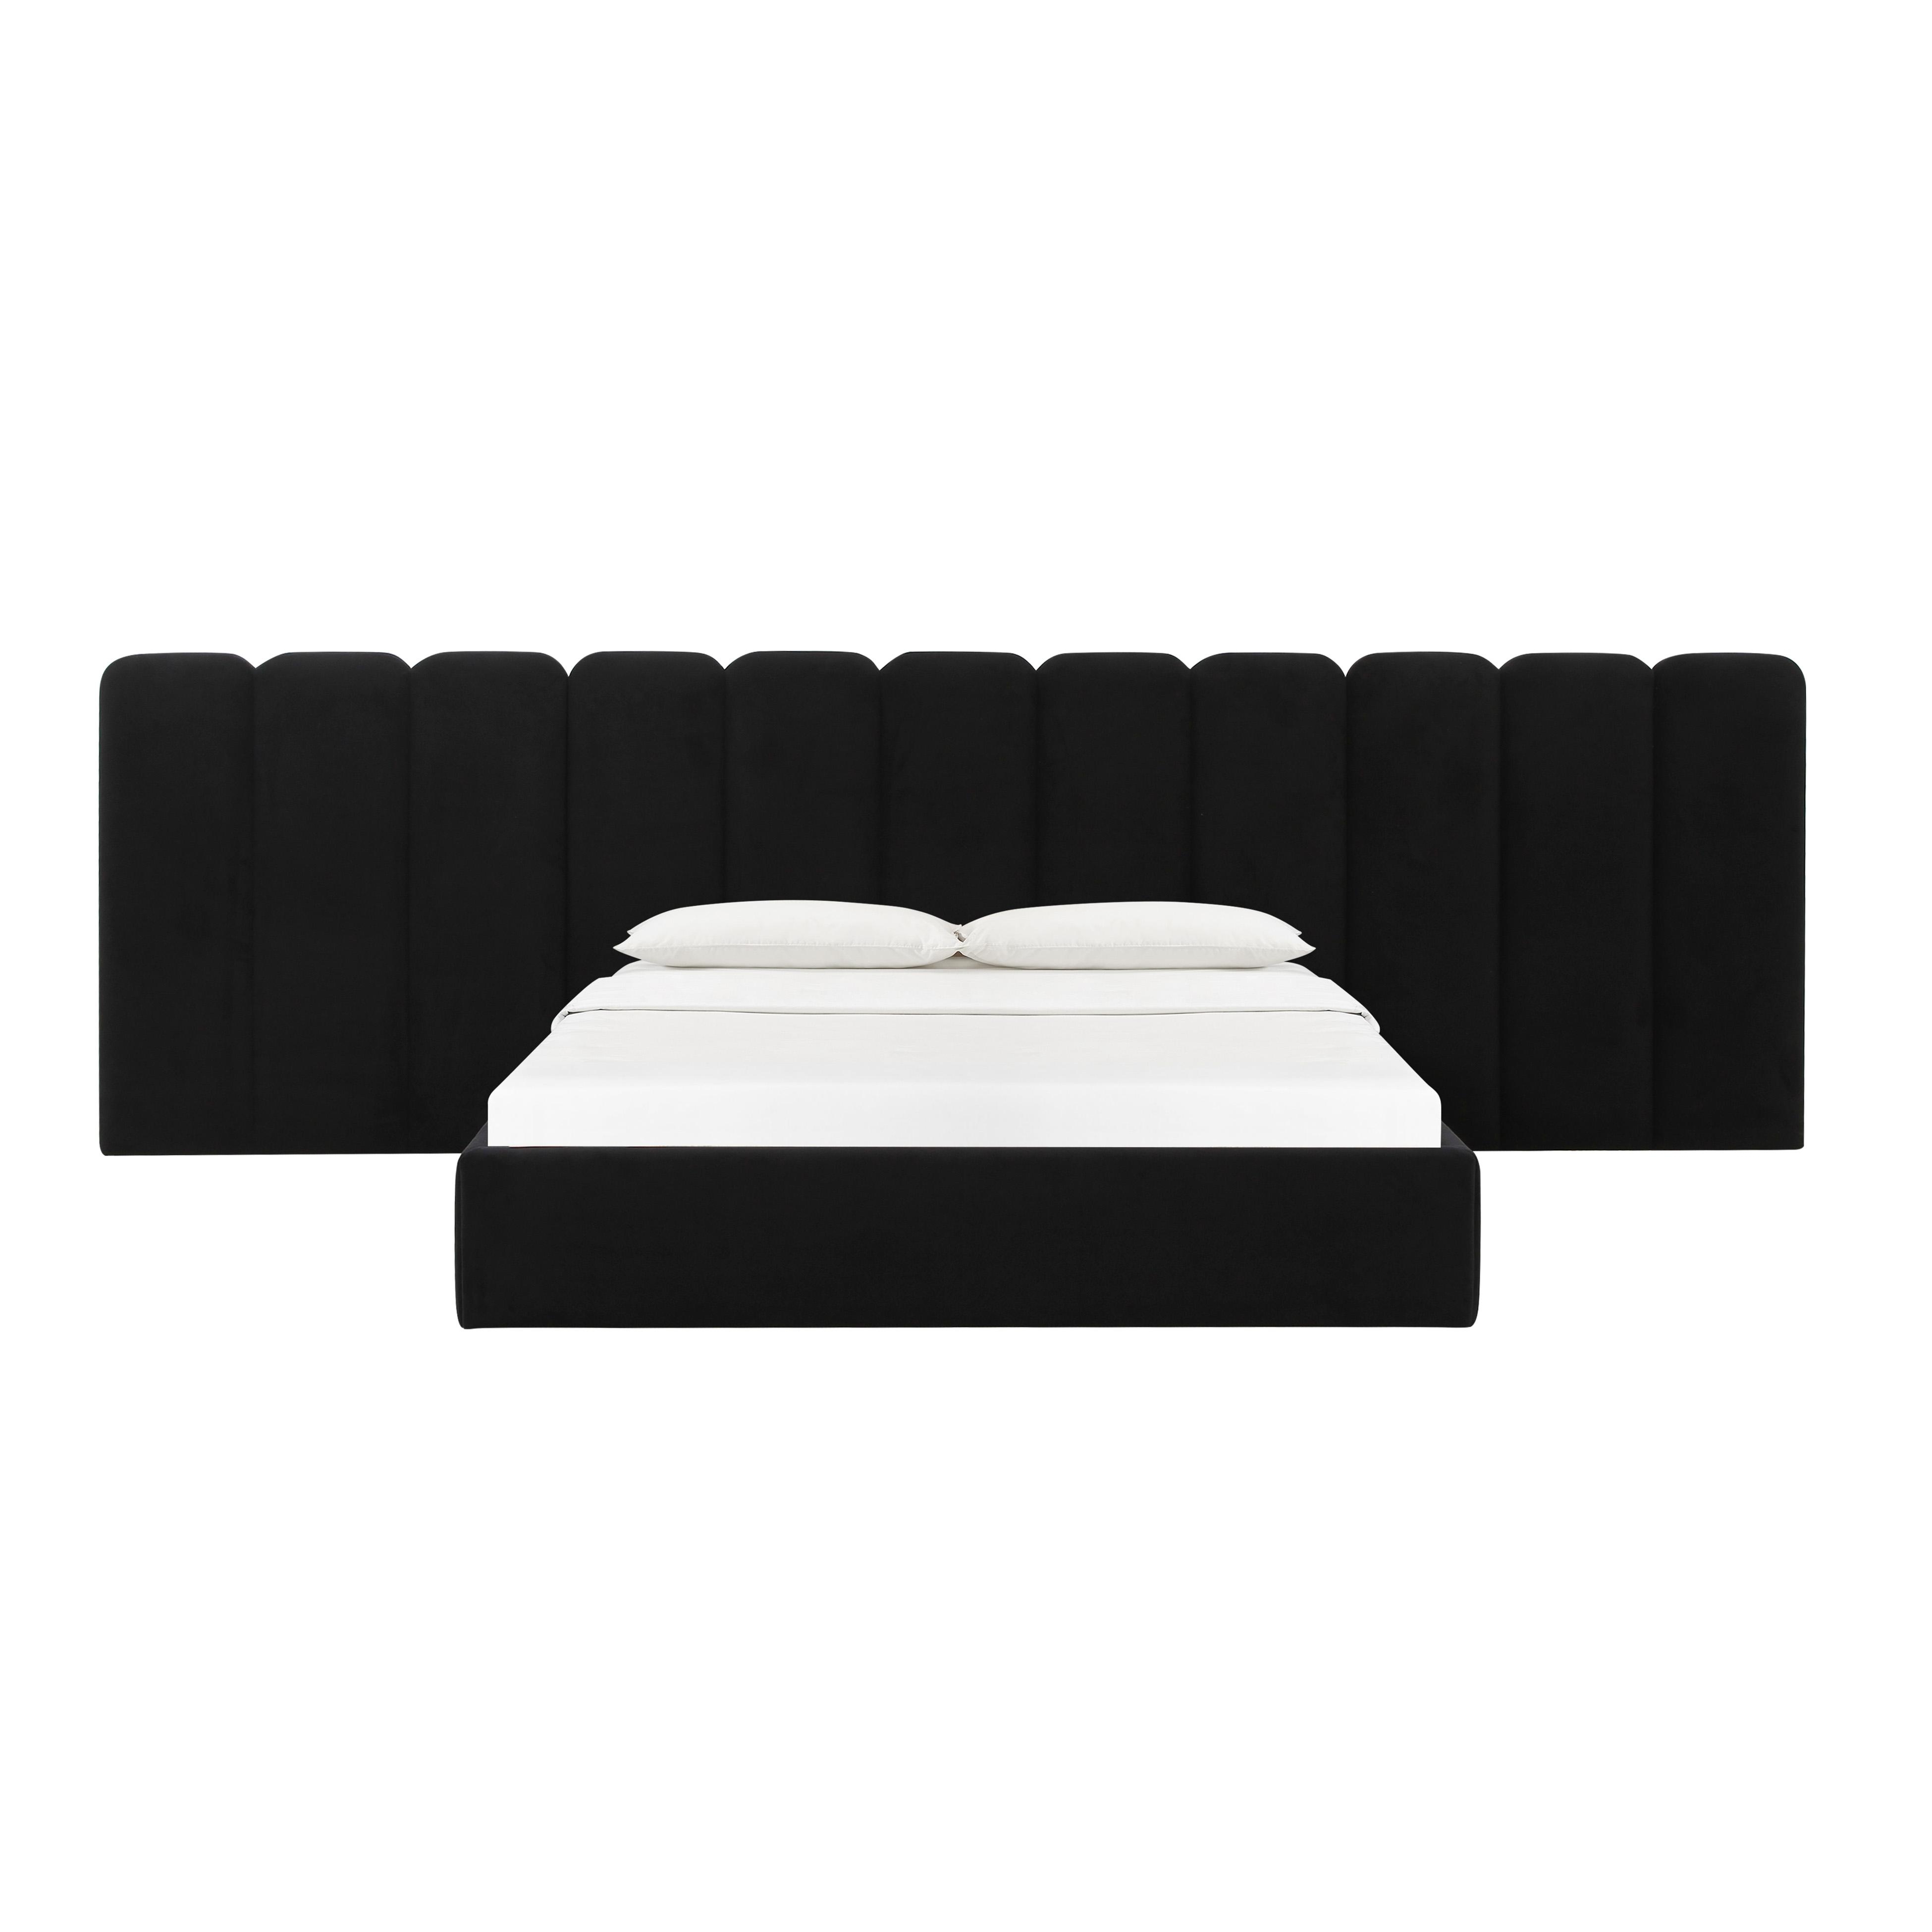 Palani Black Velvet King Bed with Wings - Image 1